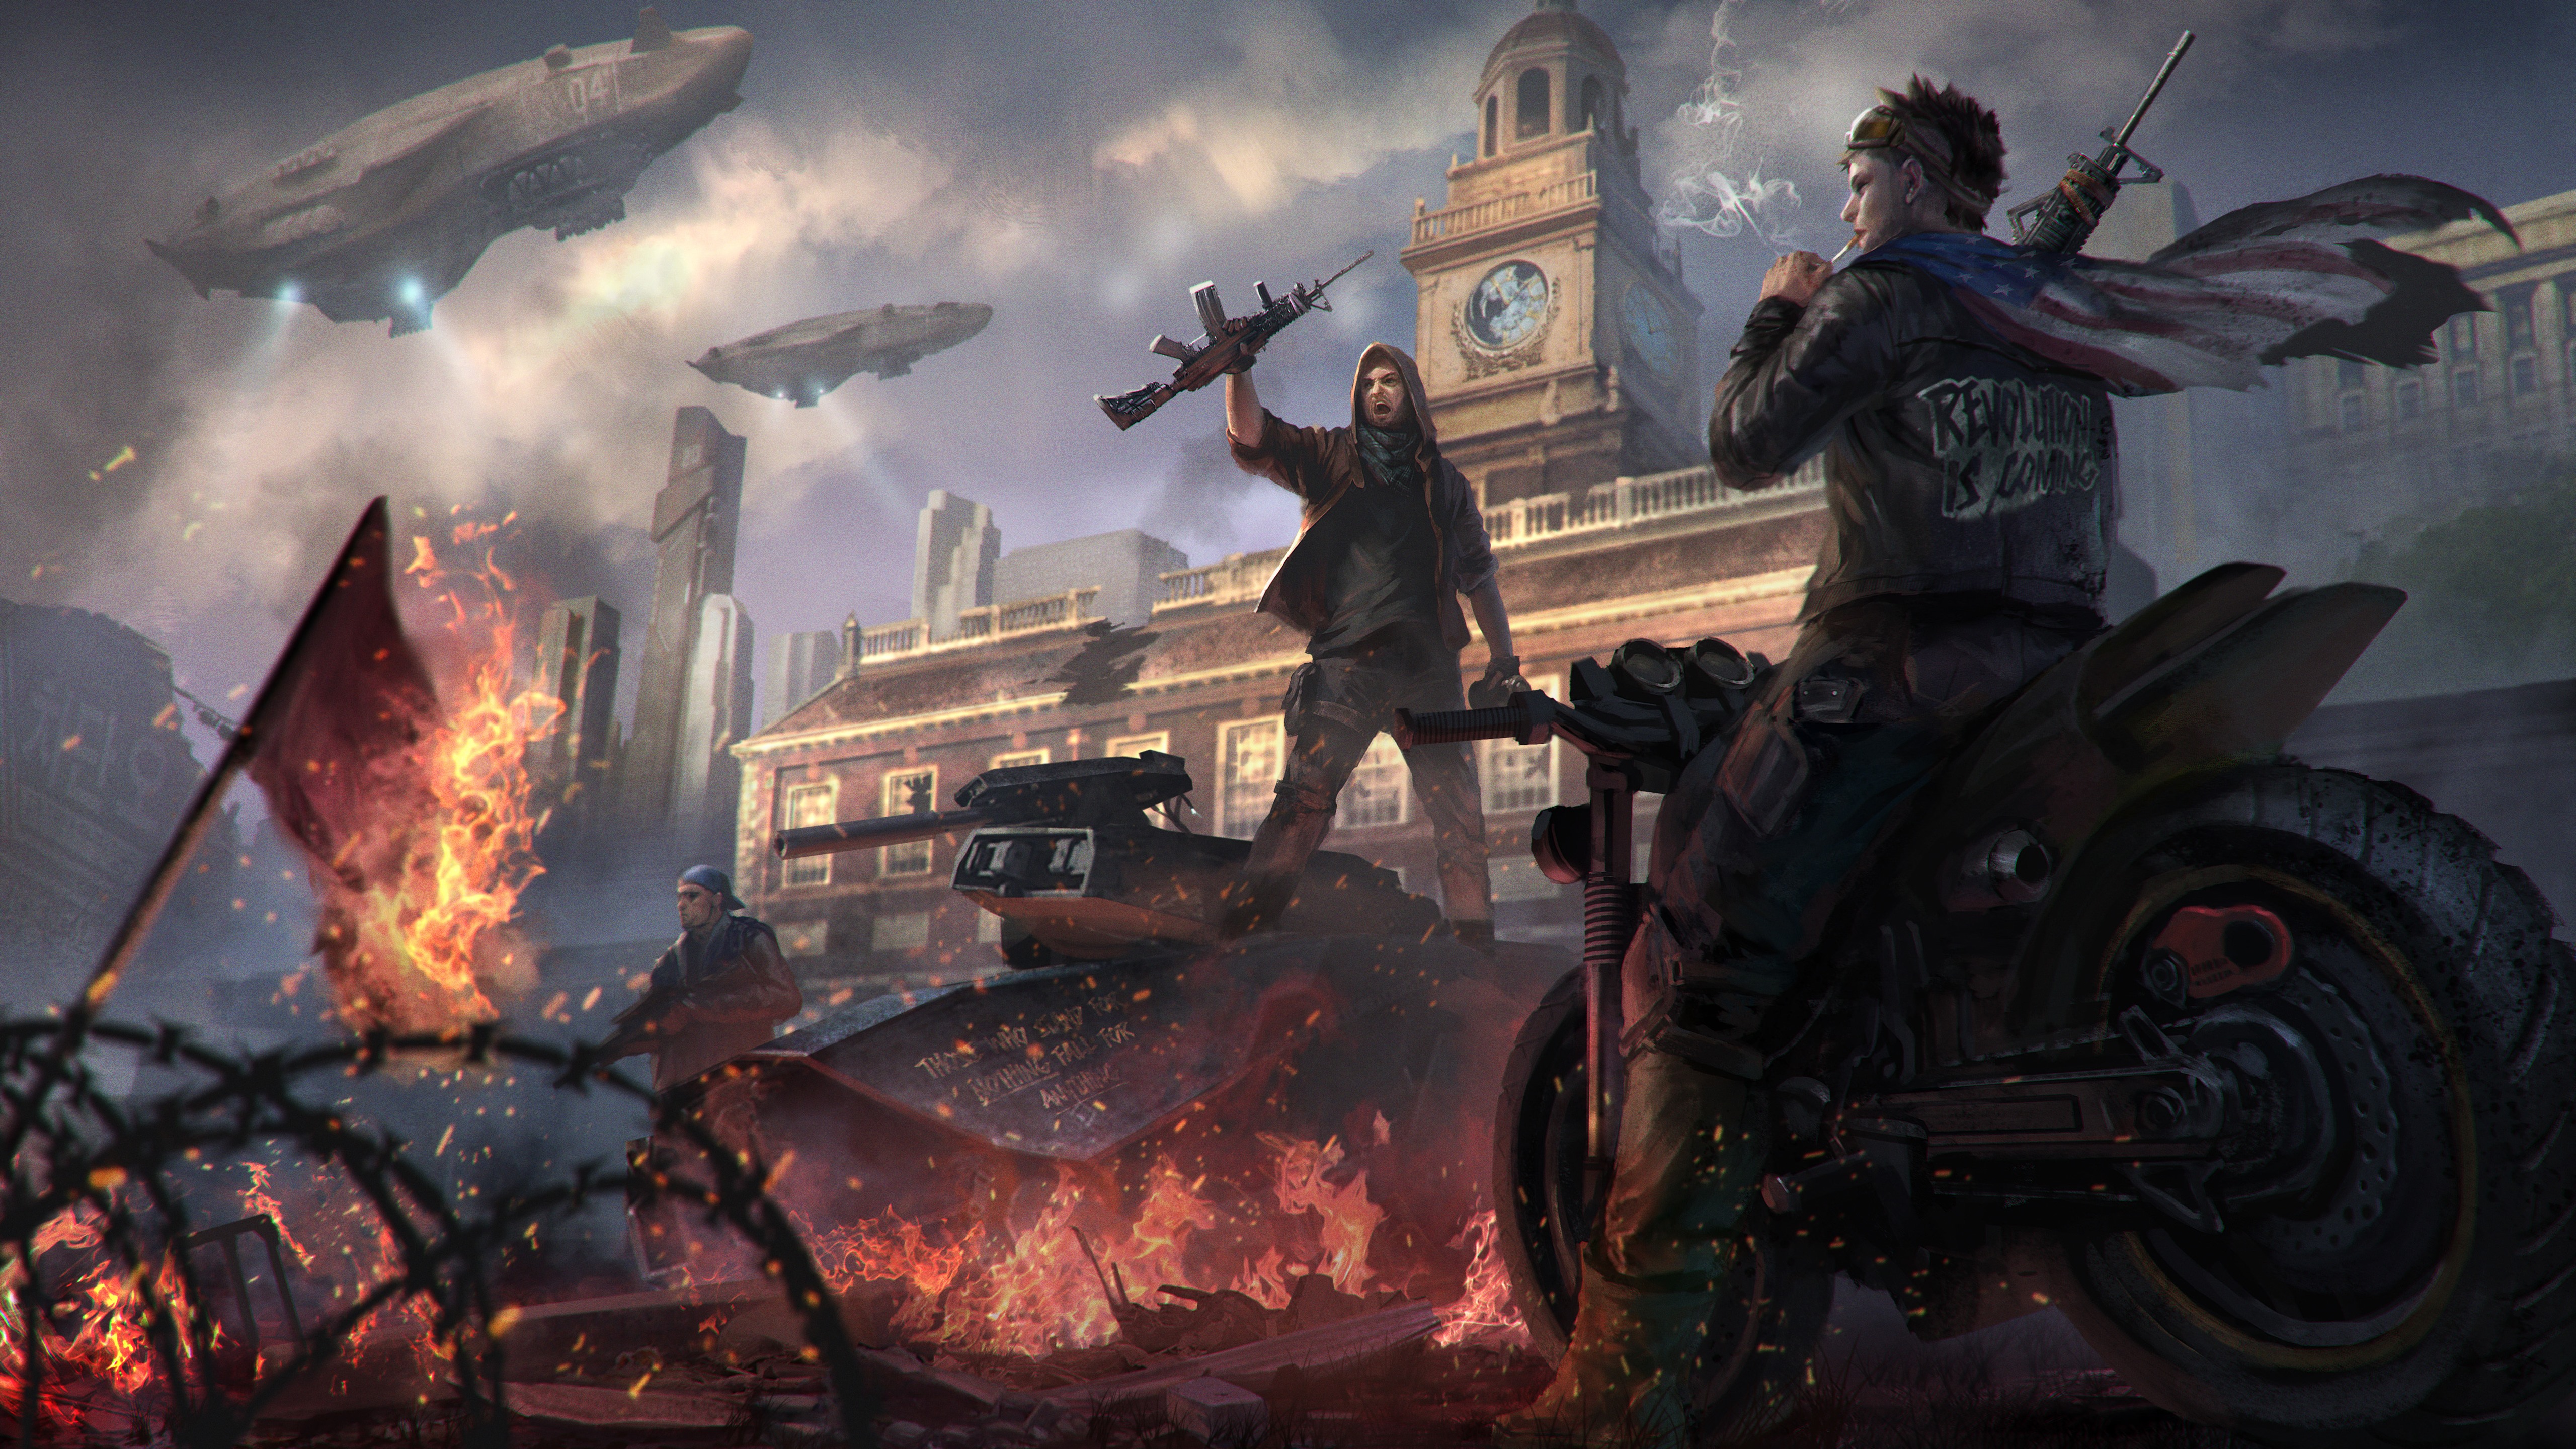 Wallpaper Homefront: The Revolution, game, ruins 5120x2880 UHD 5K Picture, Image